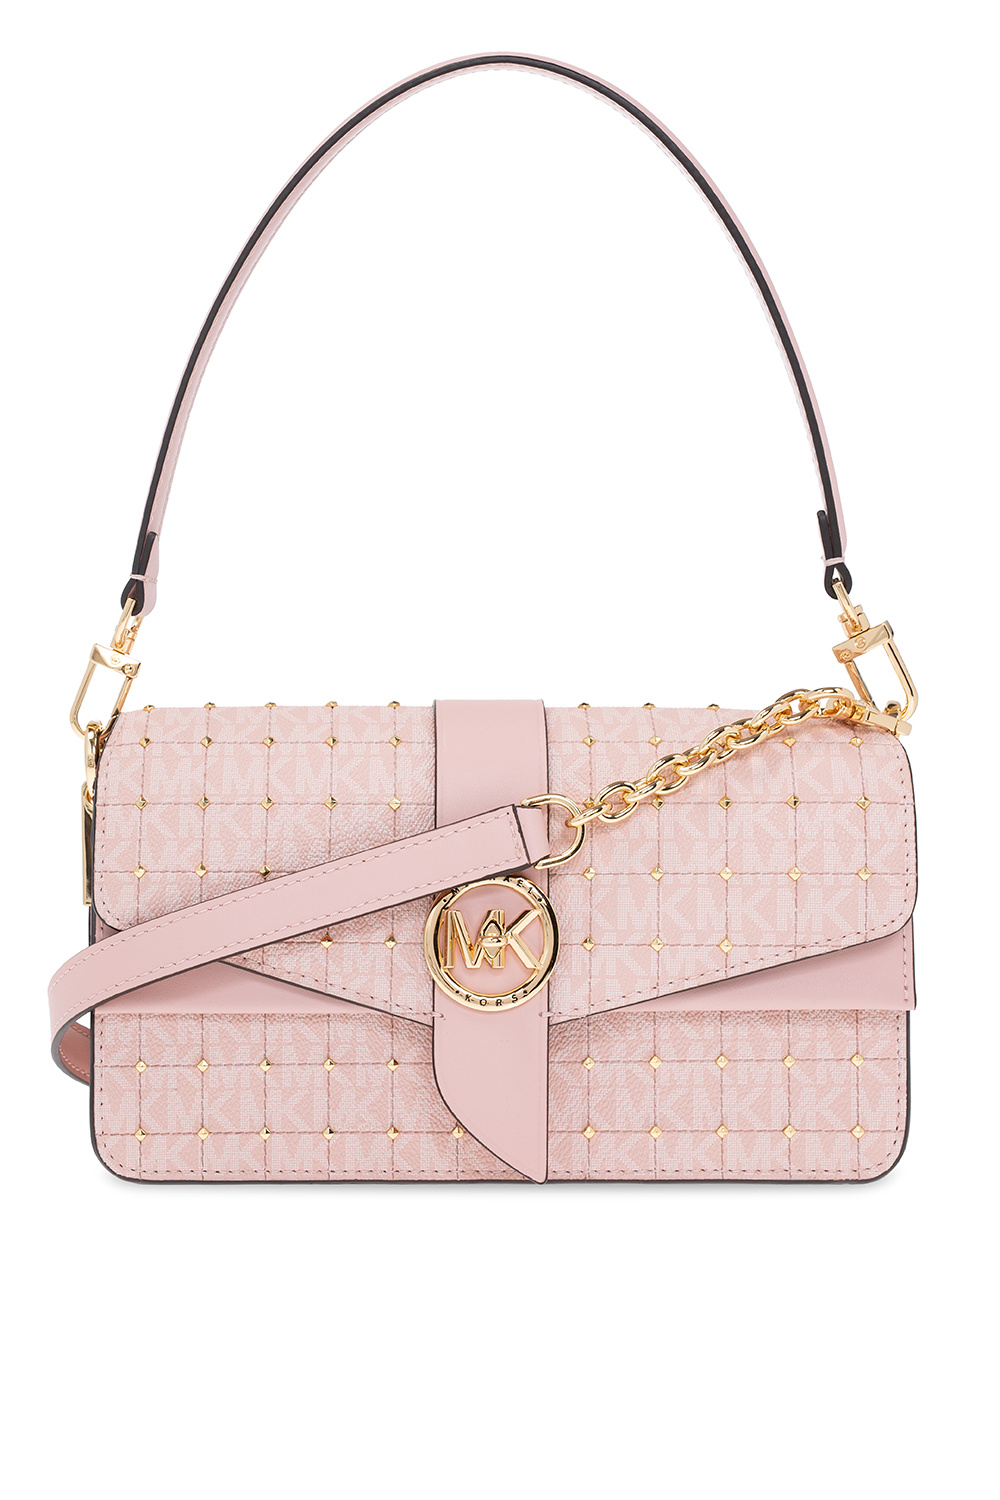 Michael Kors Greenwich Leather Crossbody Bag In Pink